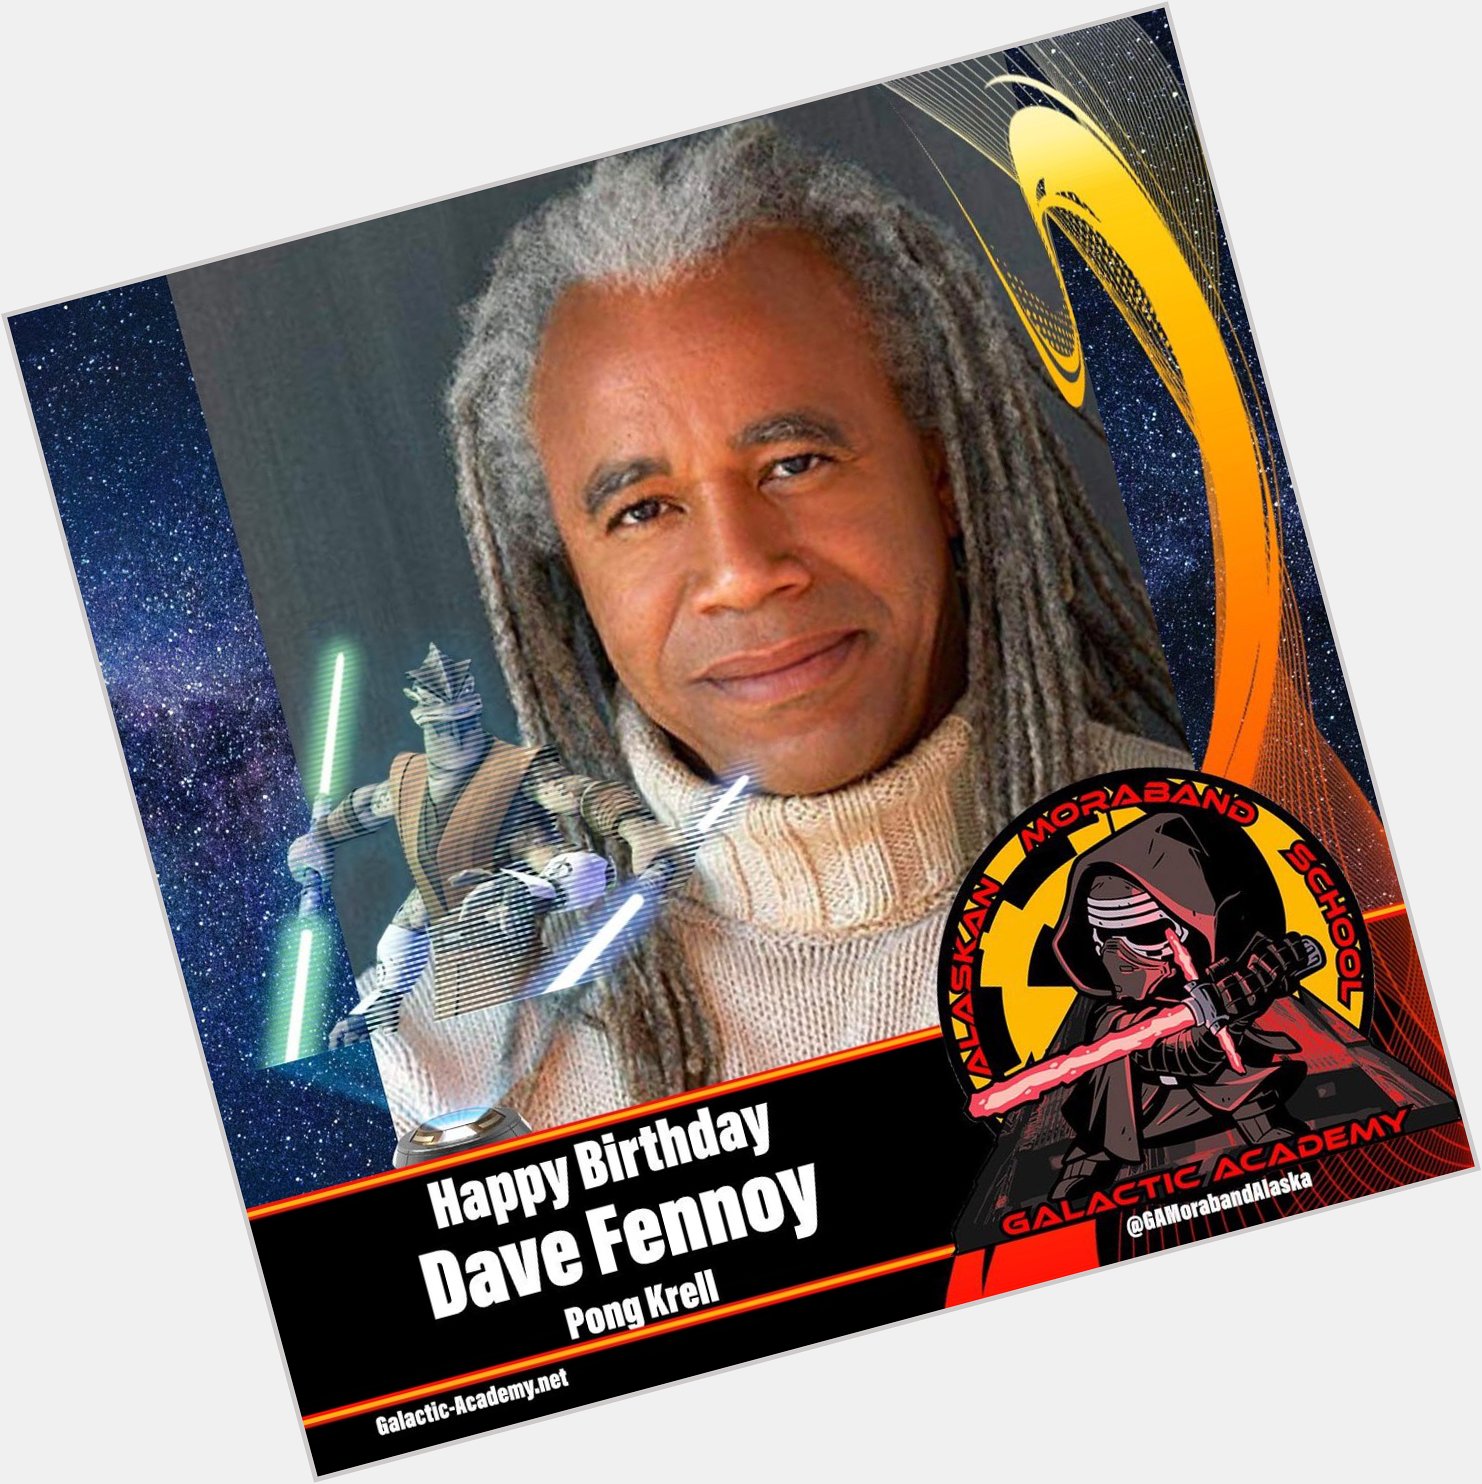 The Alaskan Moraband School would like to wish Dave Fennoy a very happy birthday!   